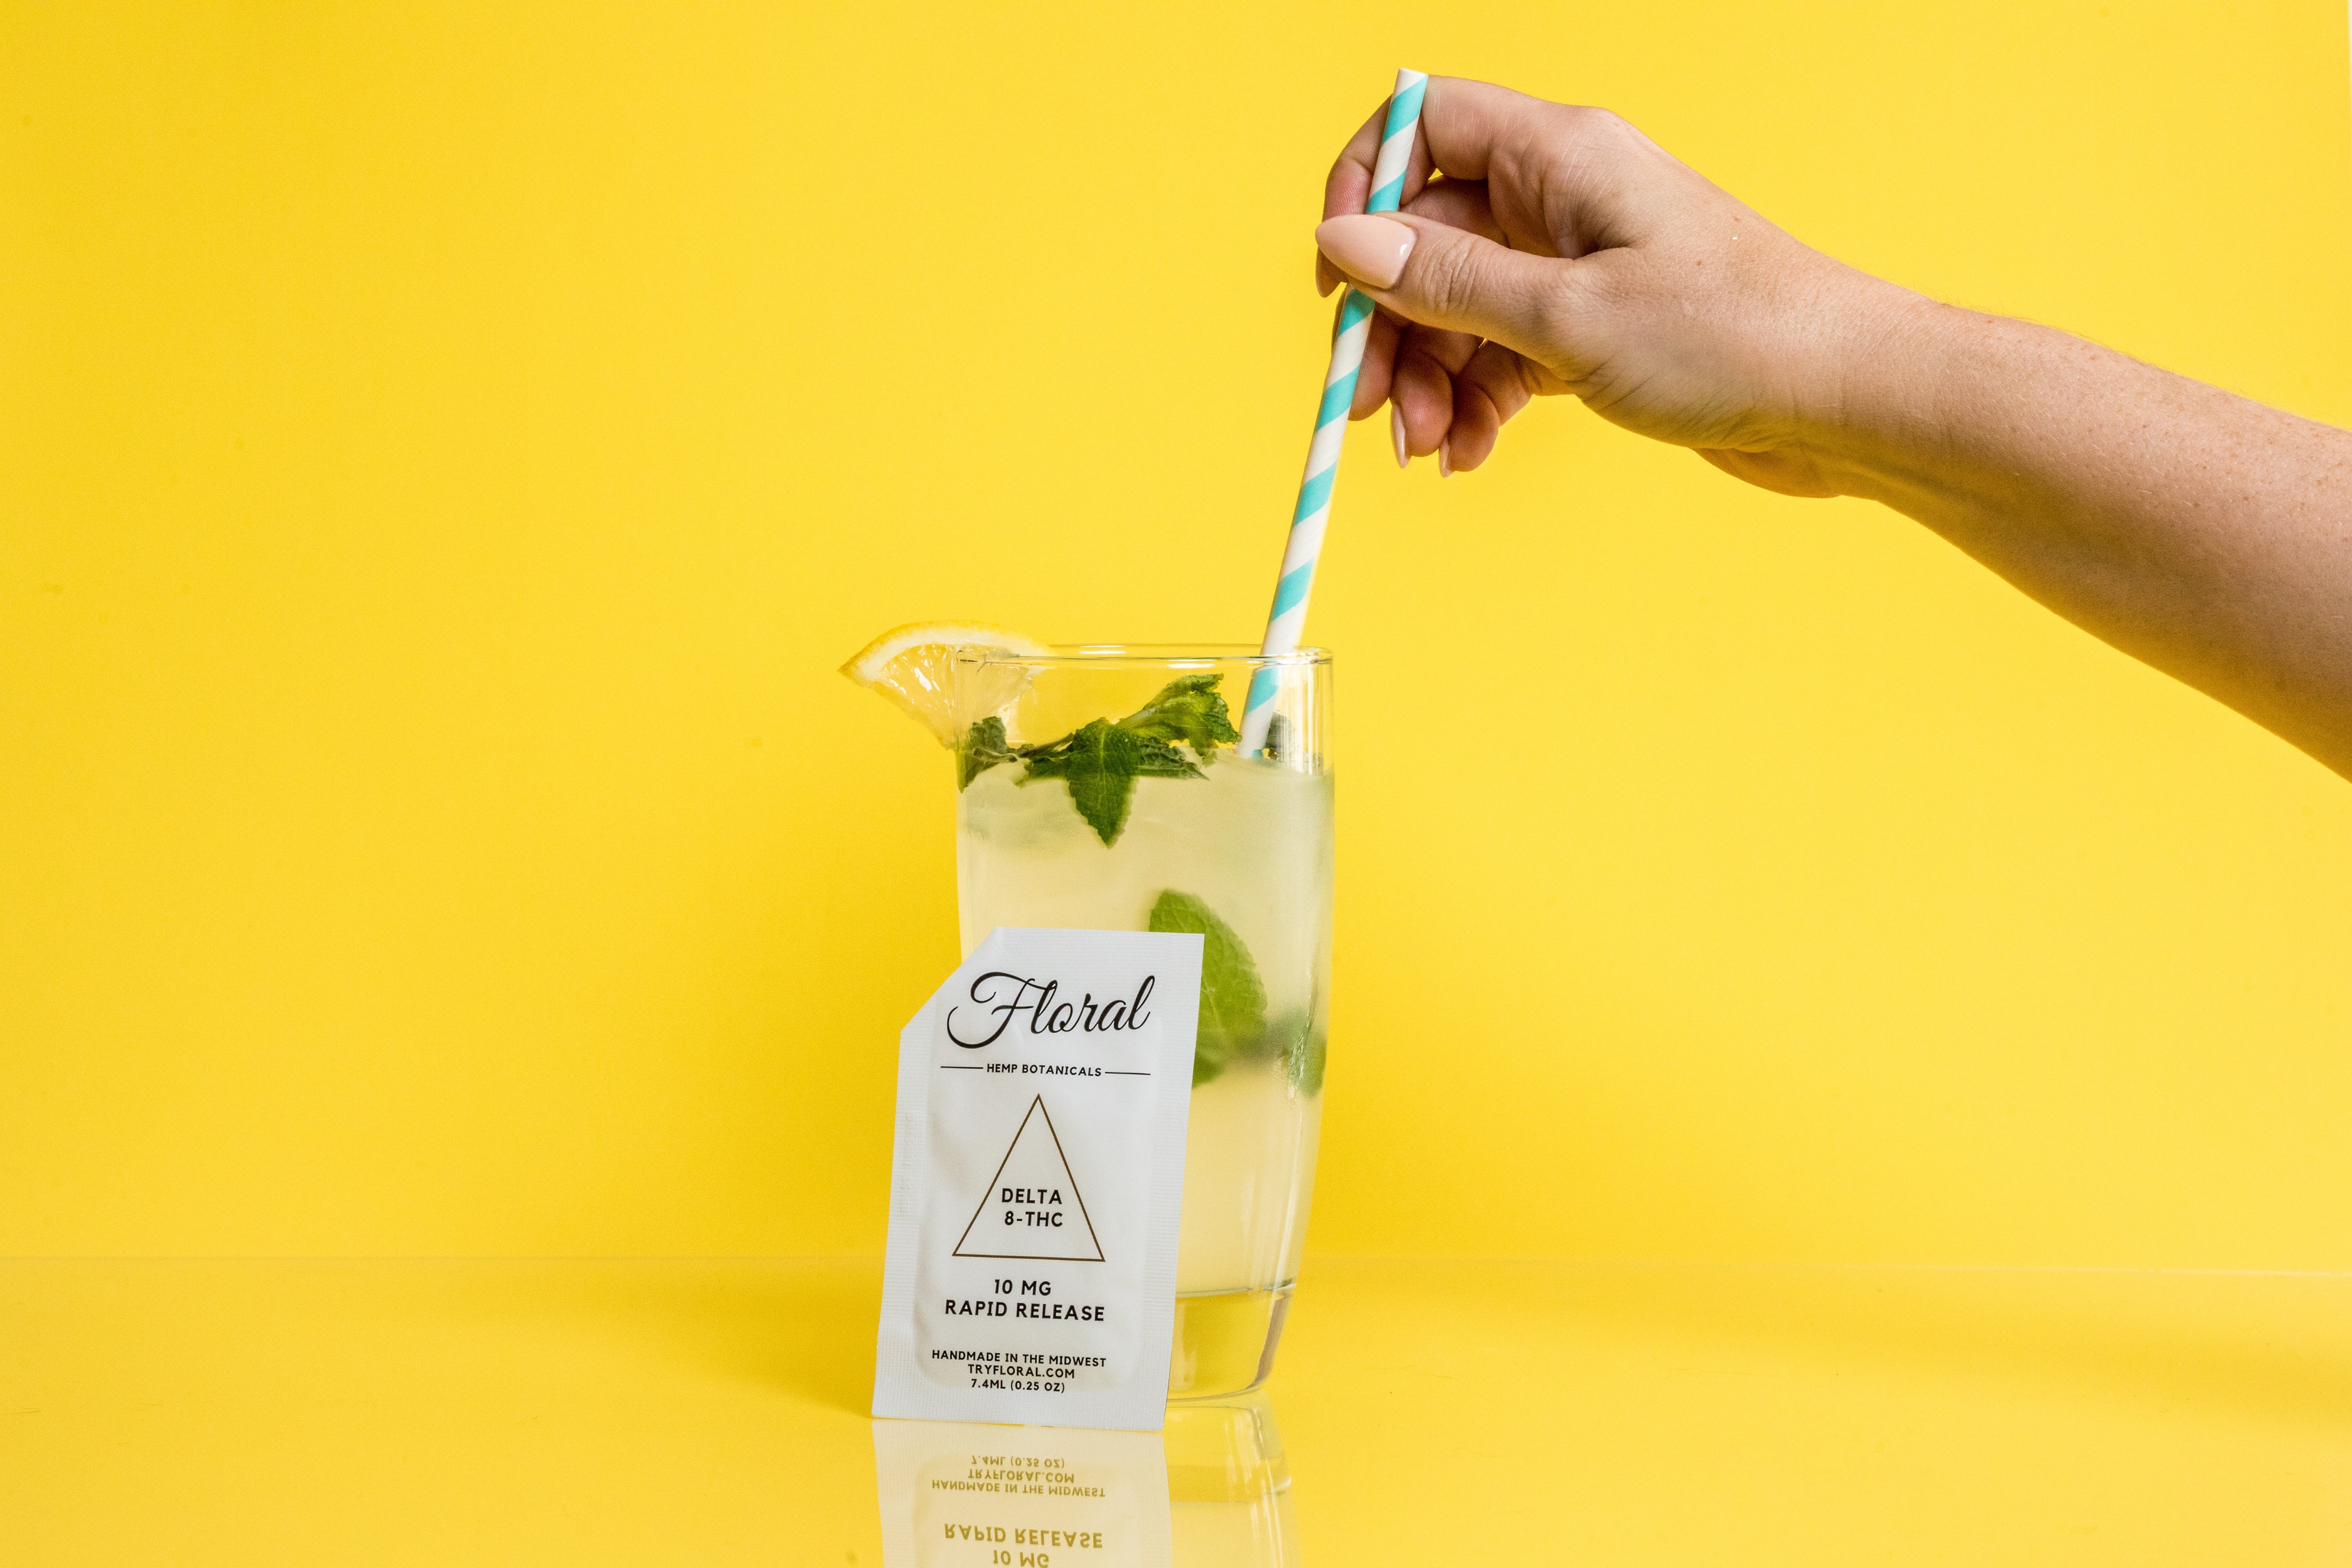 A hand stirring a packet of Floral Beverages' Floral Cocktail Enhancer into a cocktail glass against a bright yellow background.